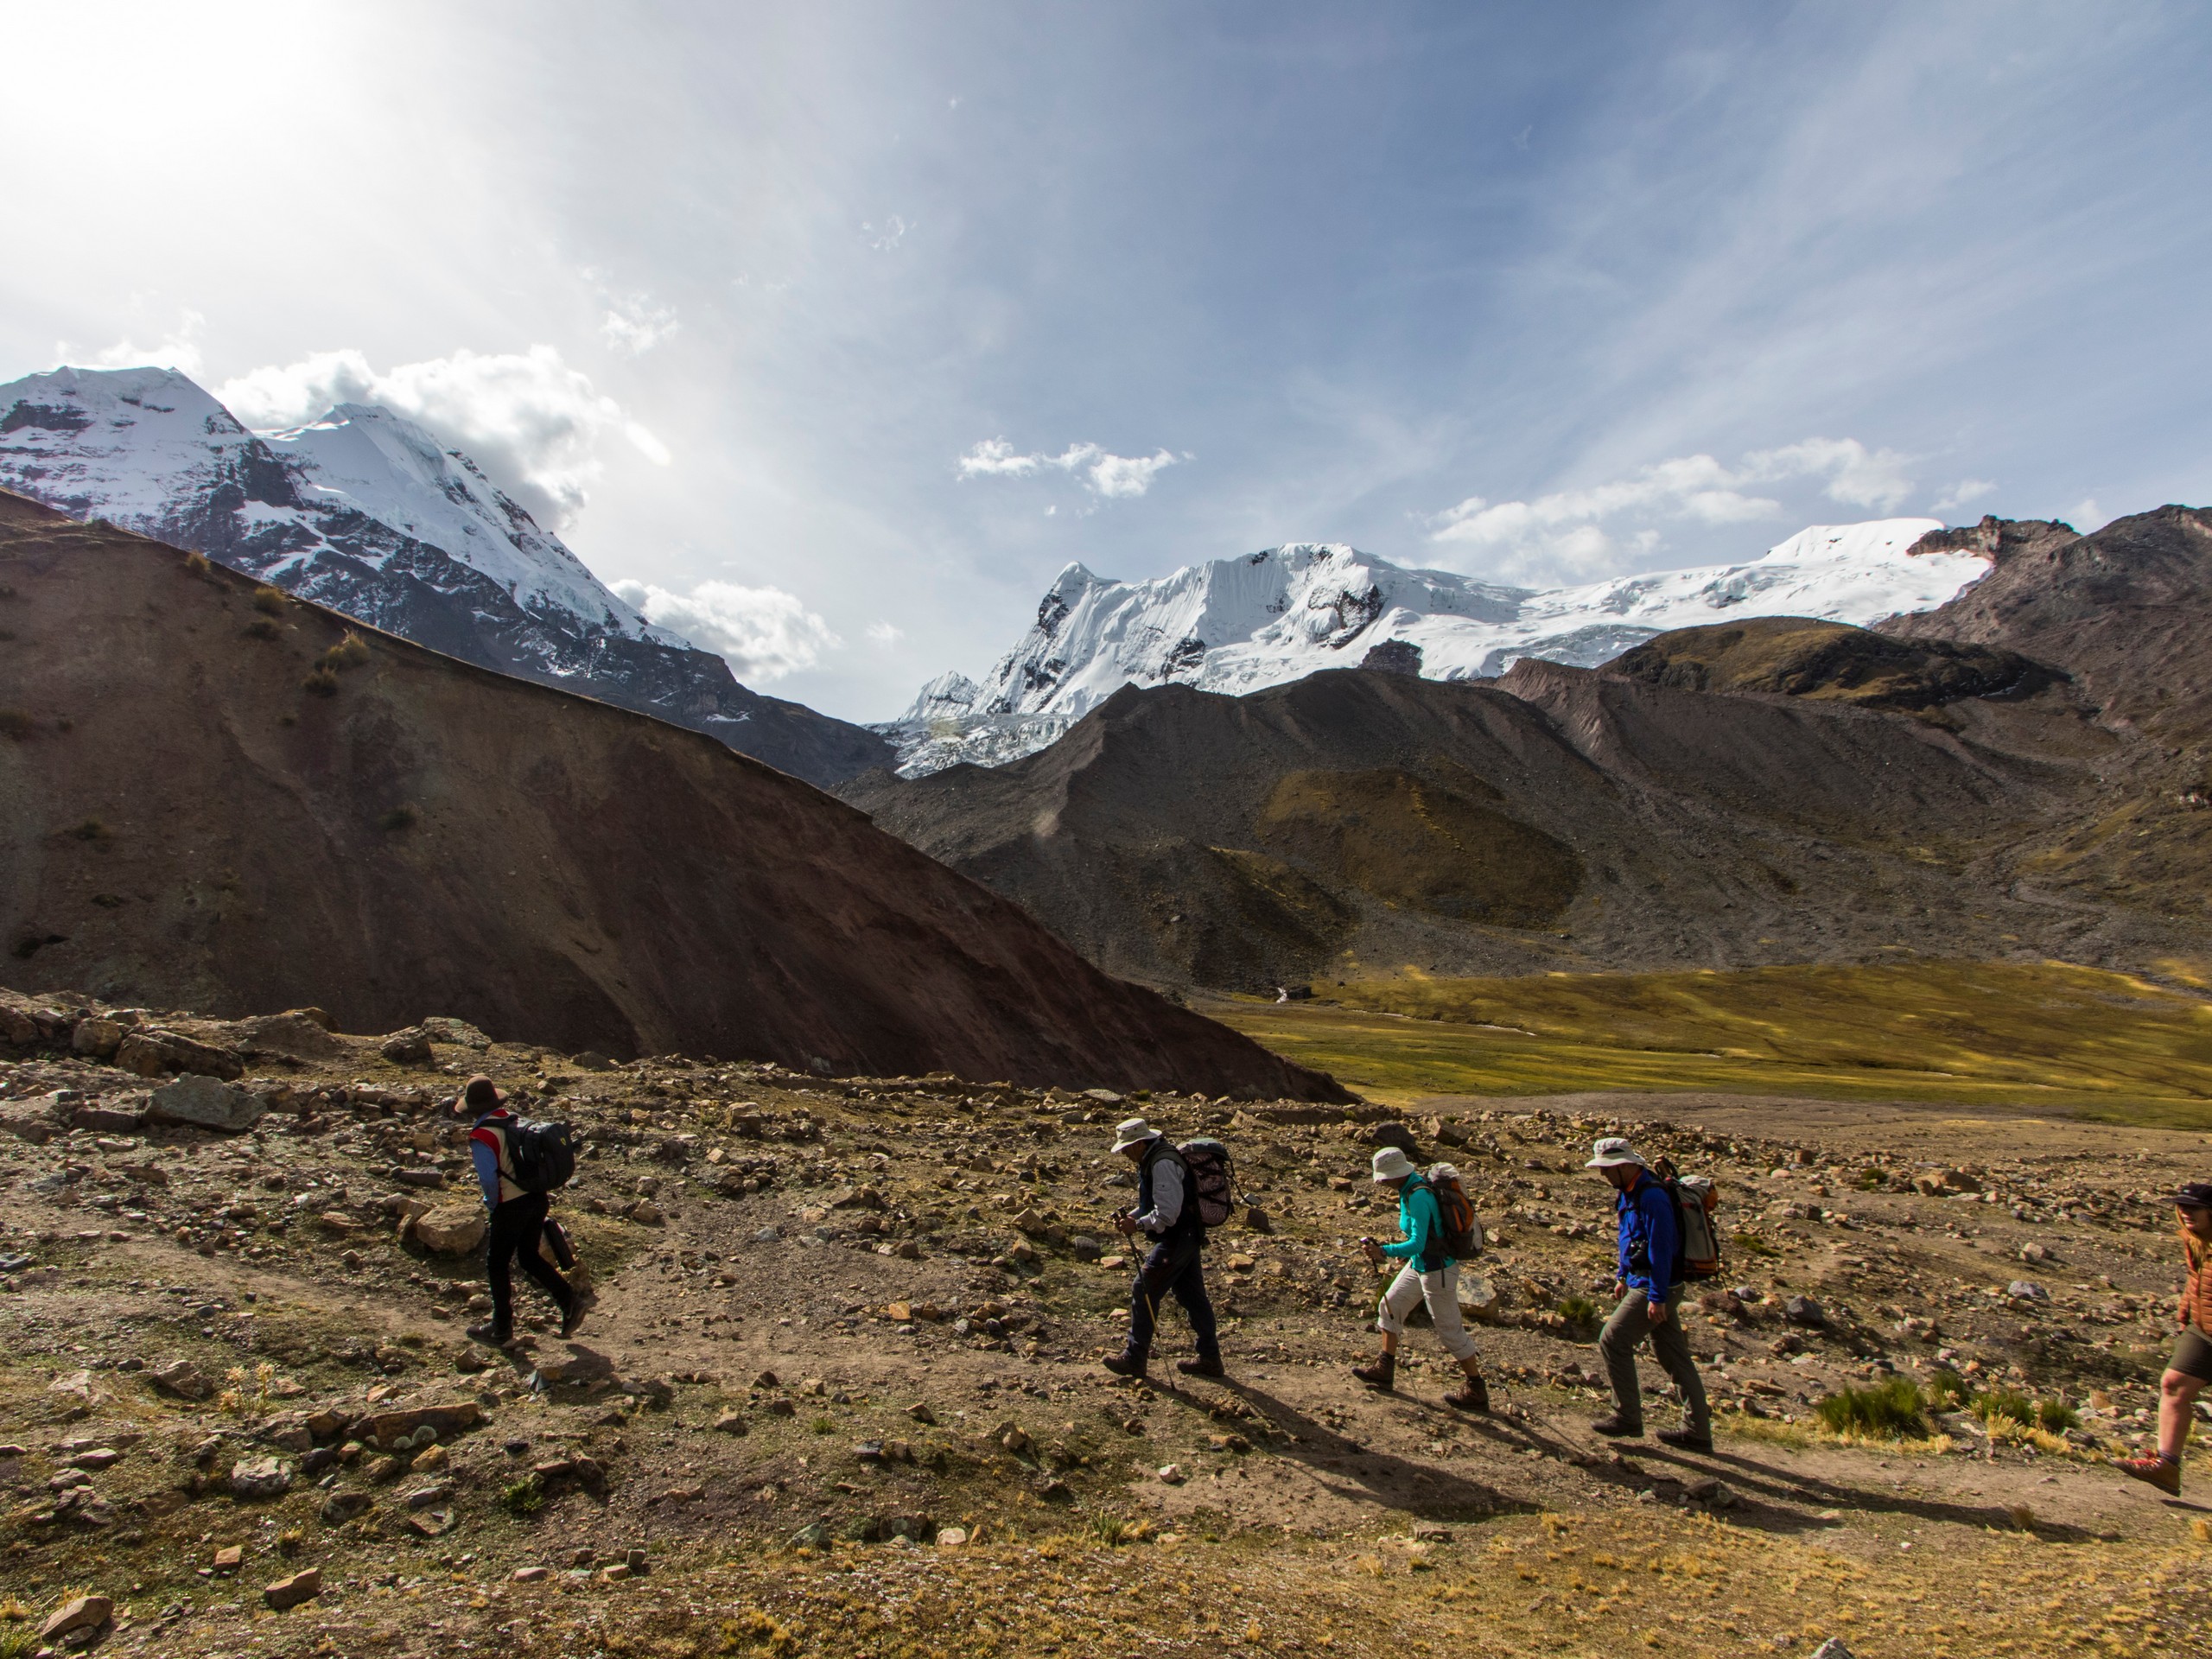 Guided group hiking in the Ausangate Mountains